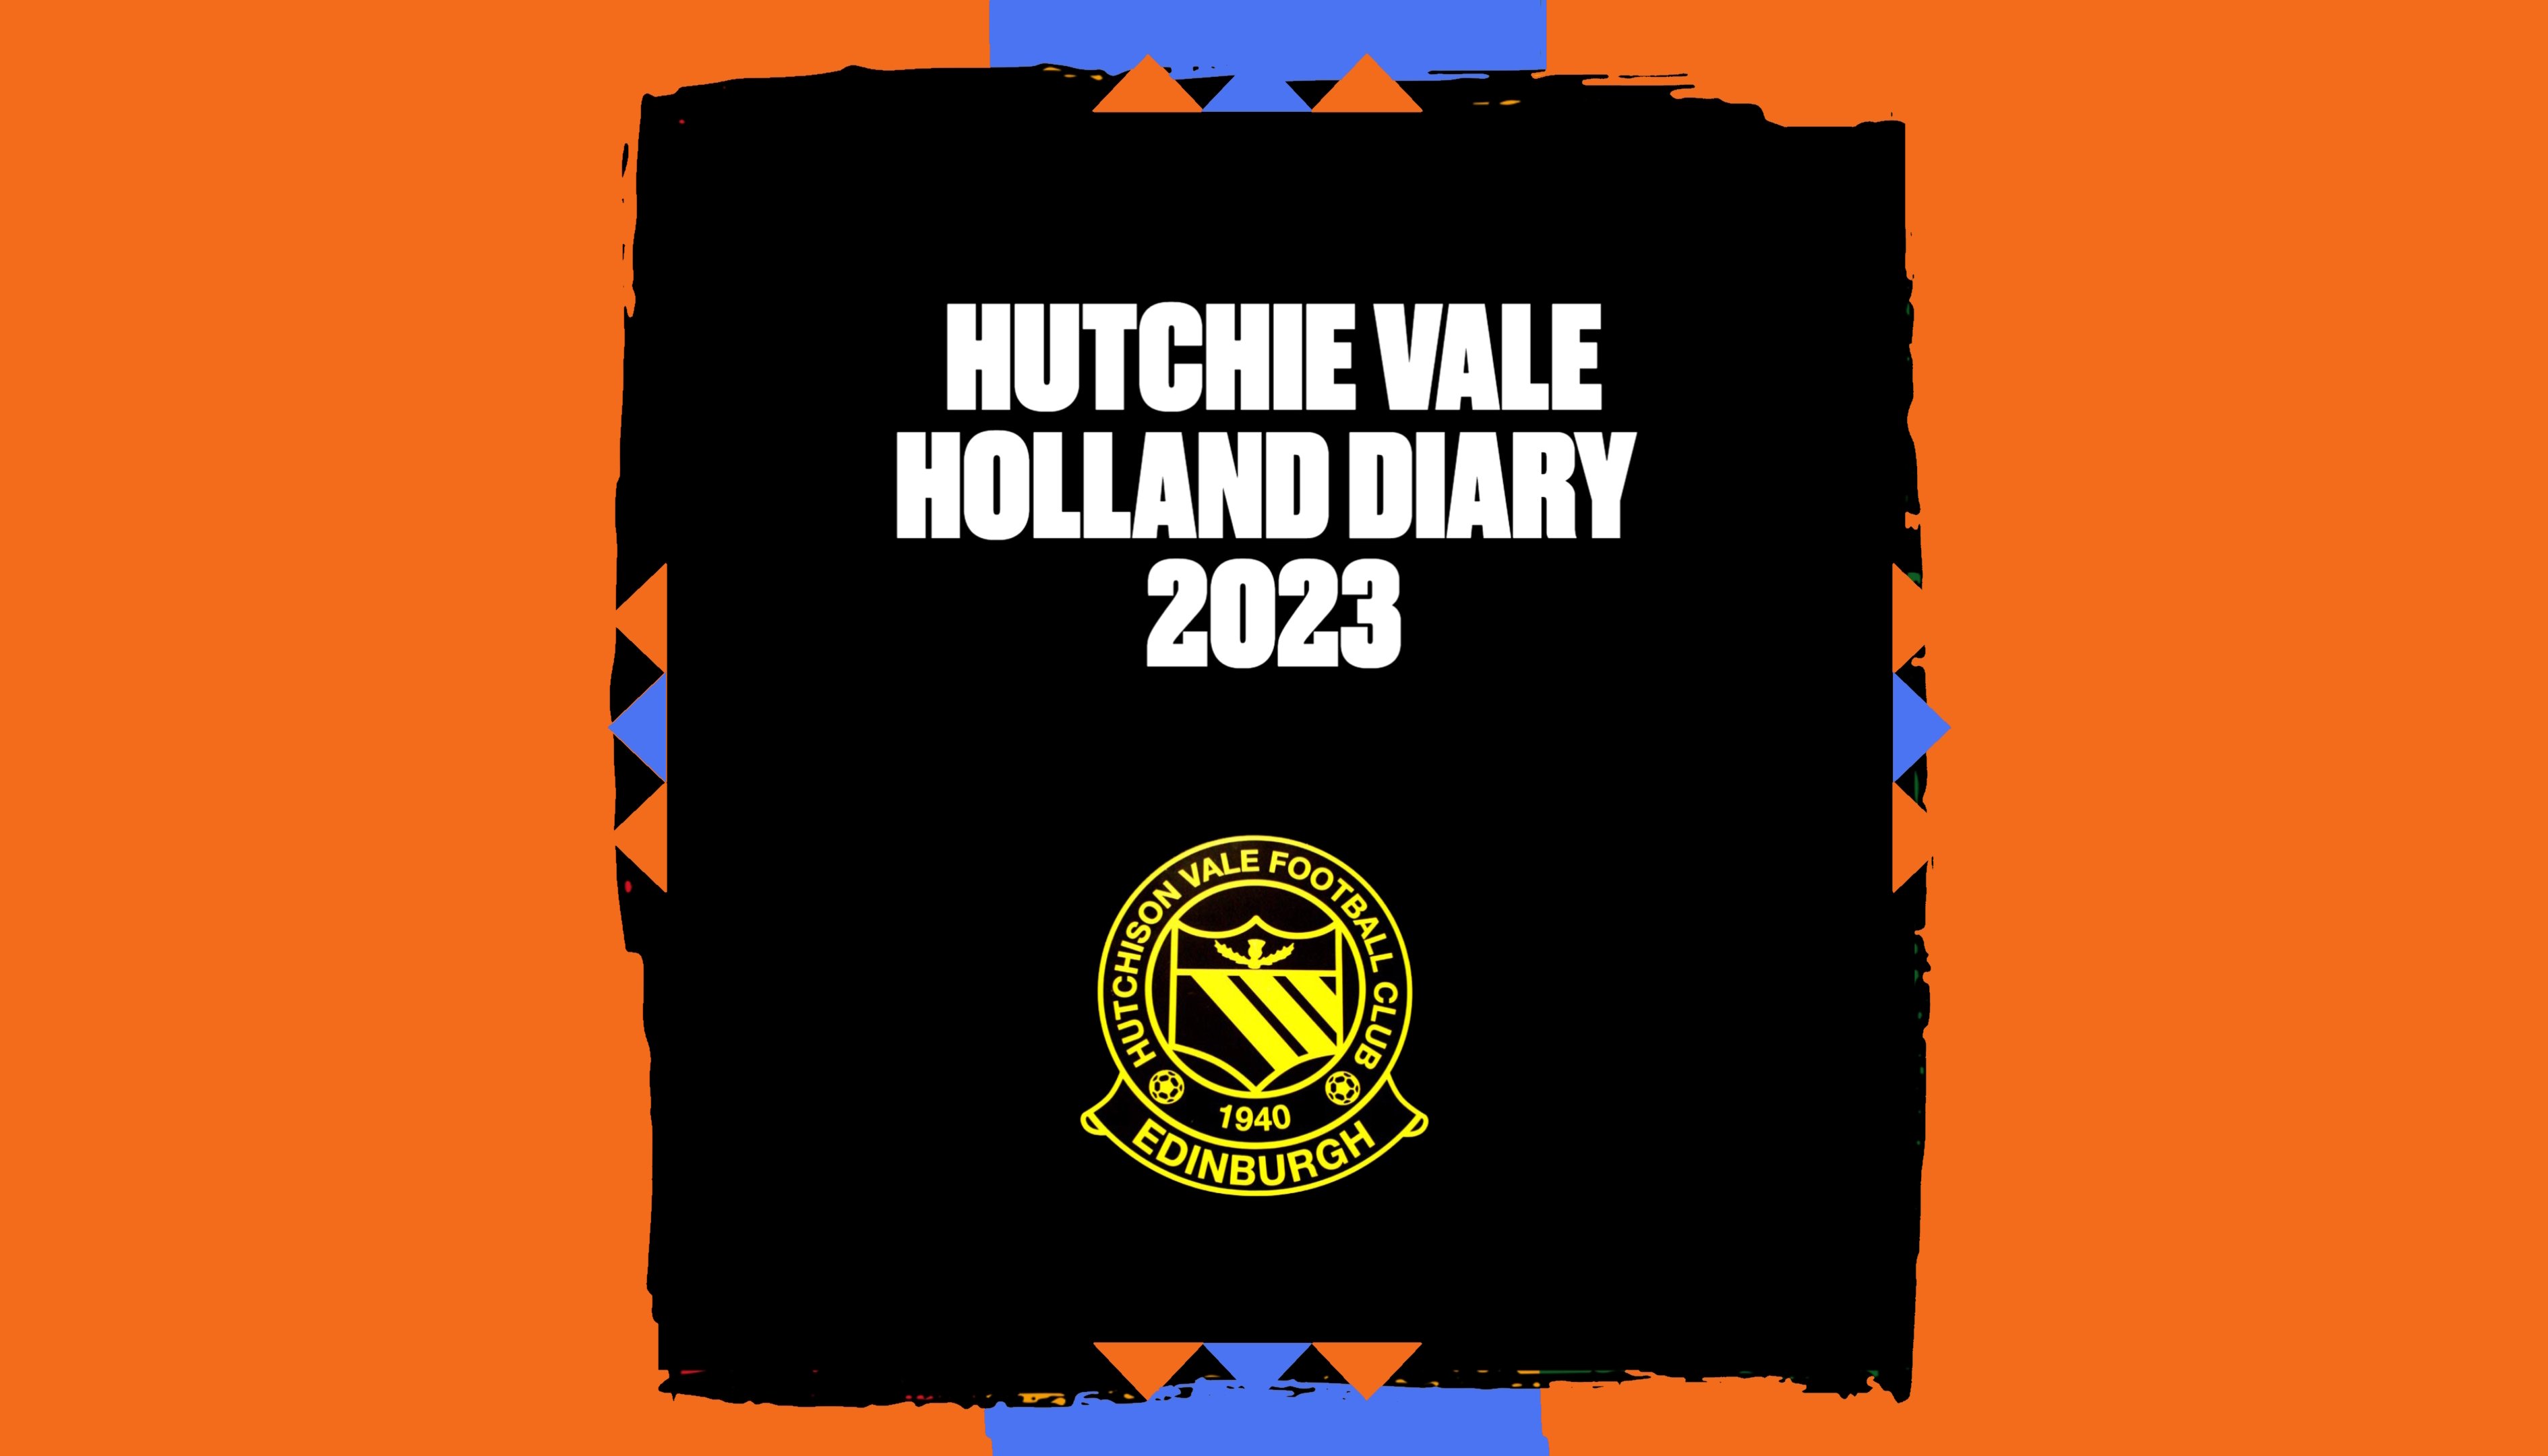 Read Hutchison Vale Holland Easter Open Diary 2023 by Robbie Forsyth